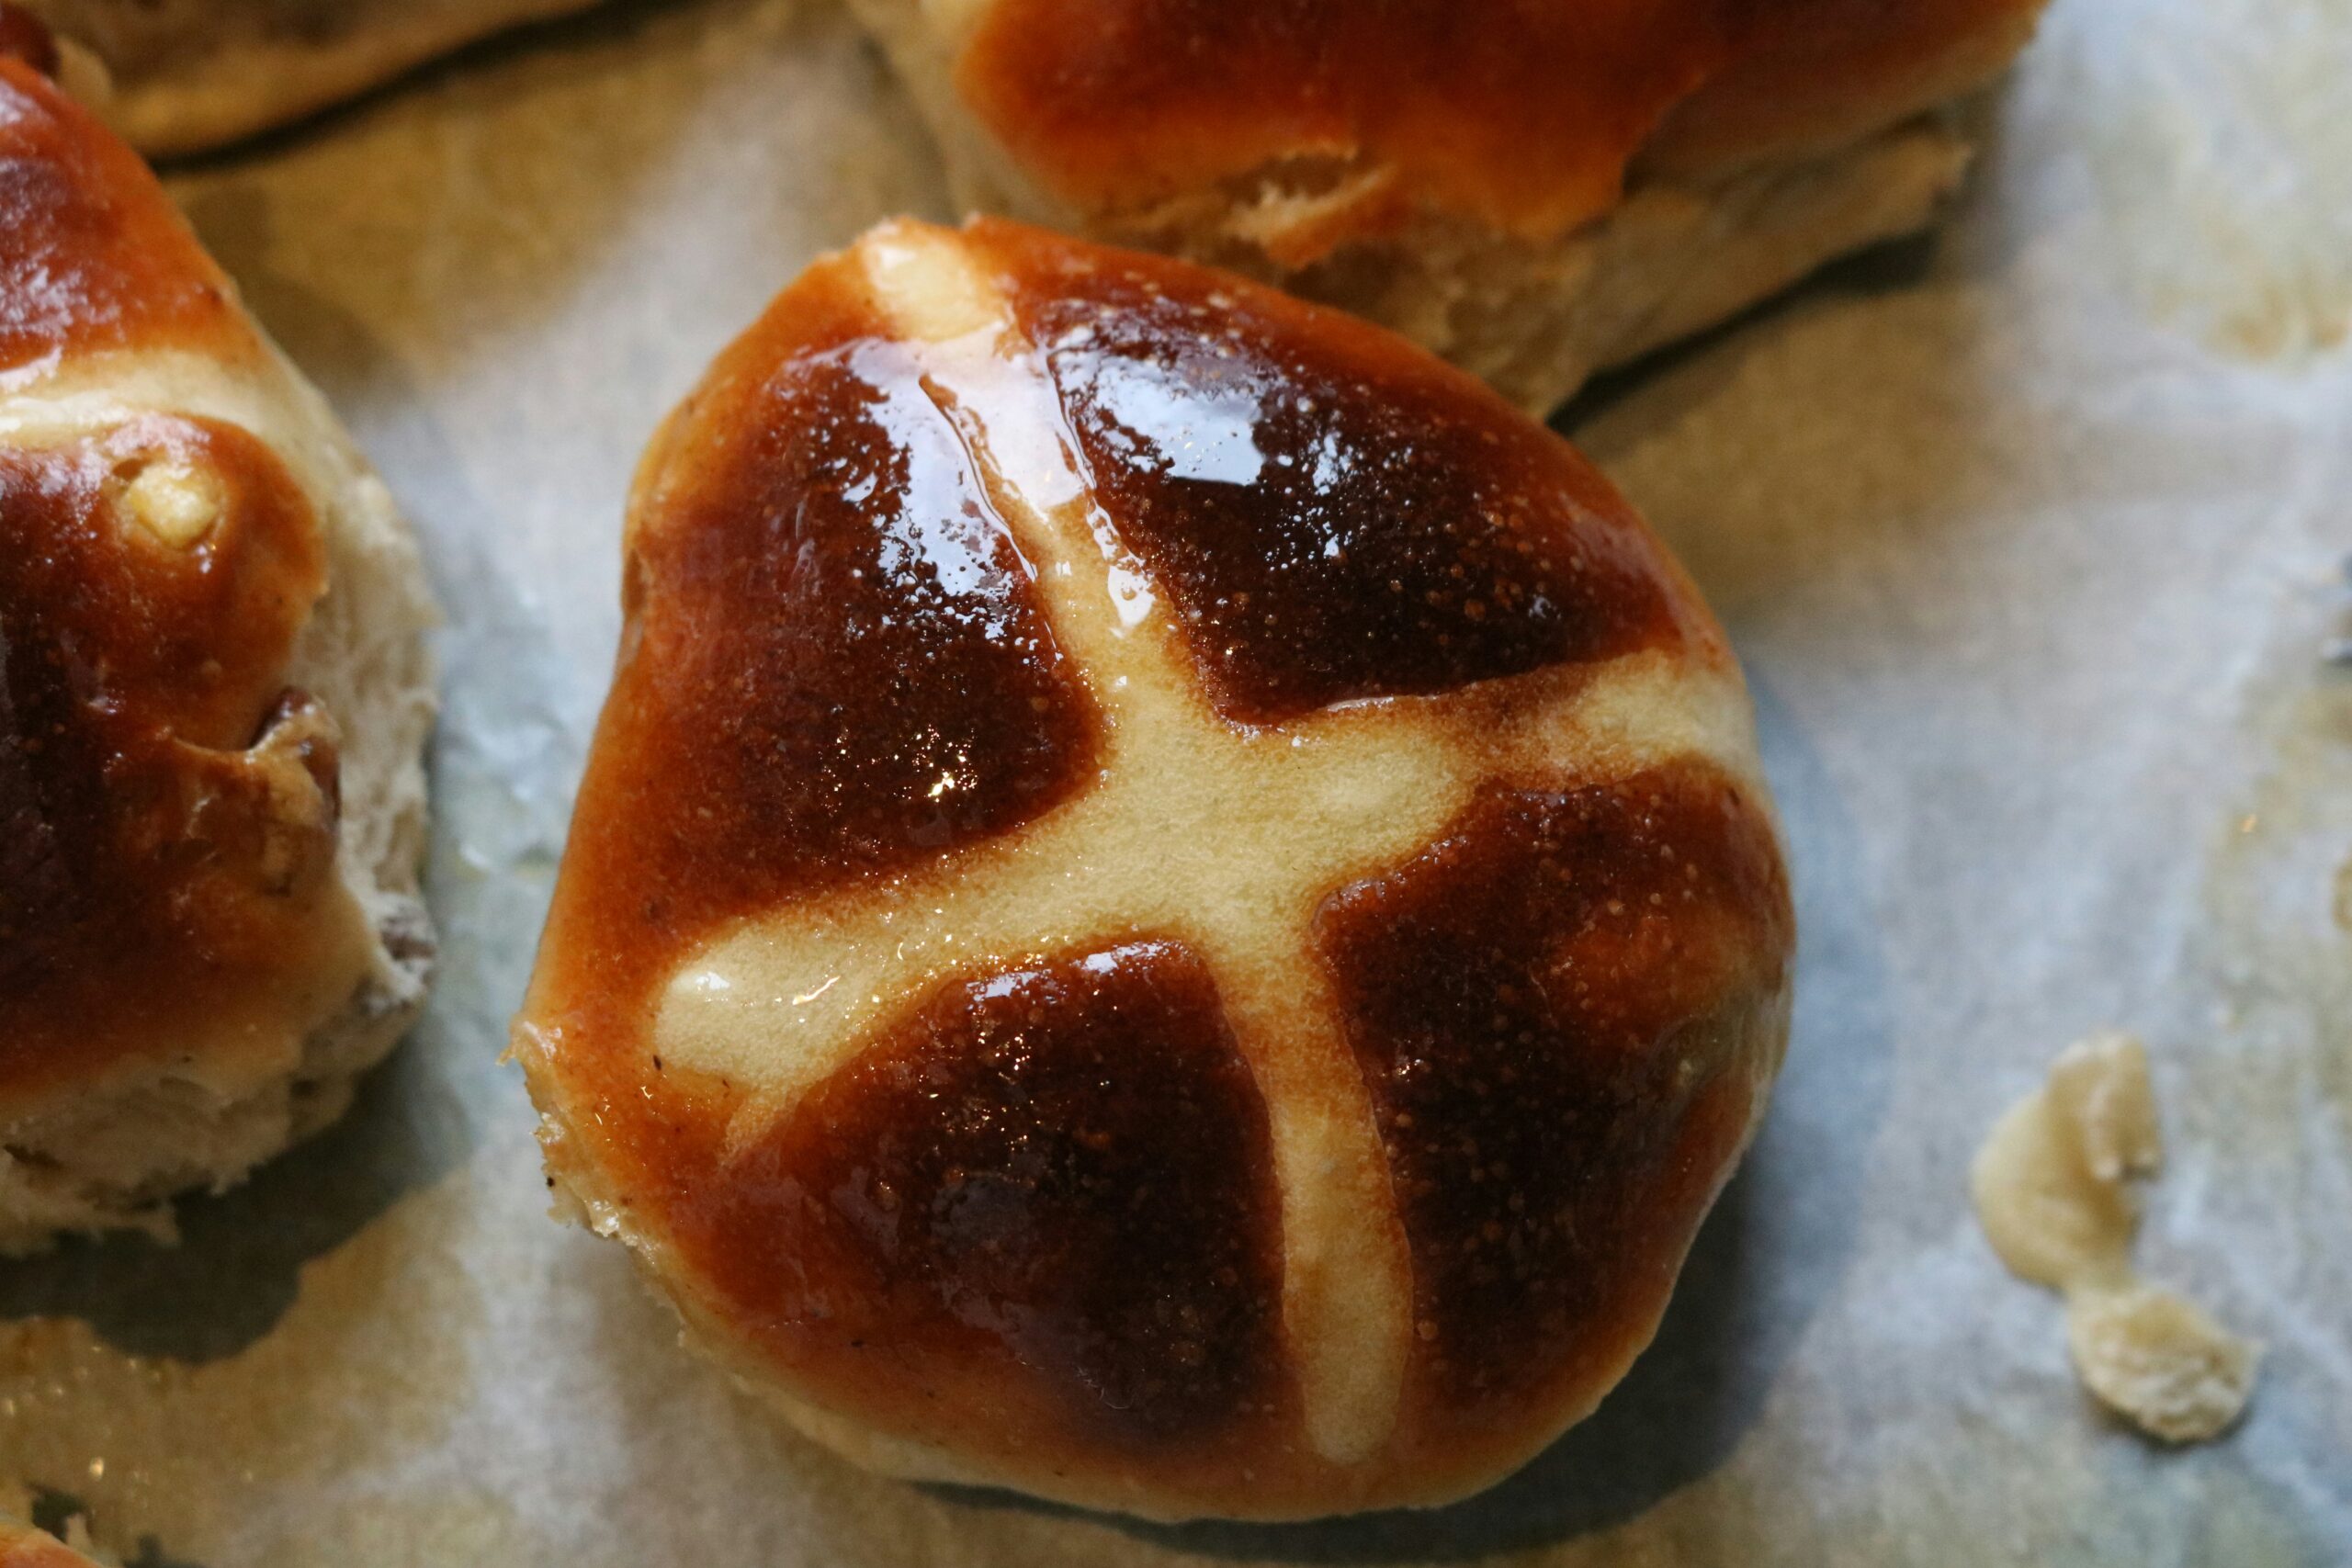 "A shiny golden bread bun with a cross on top on parchment paper "